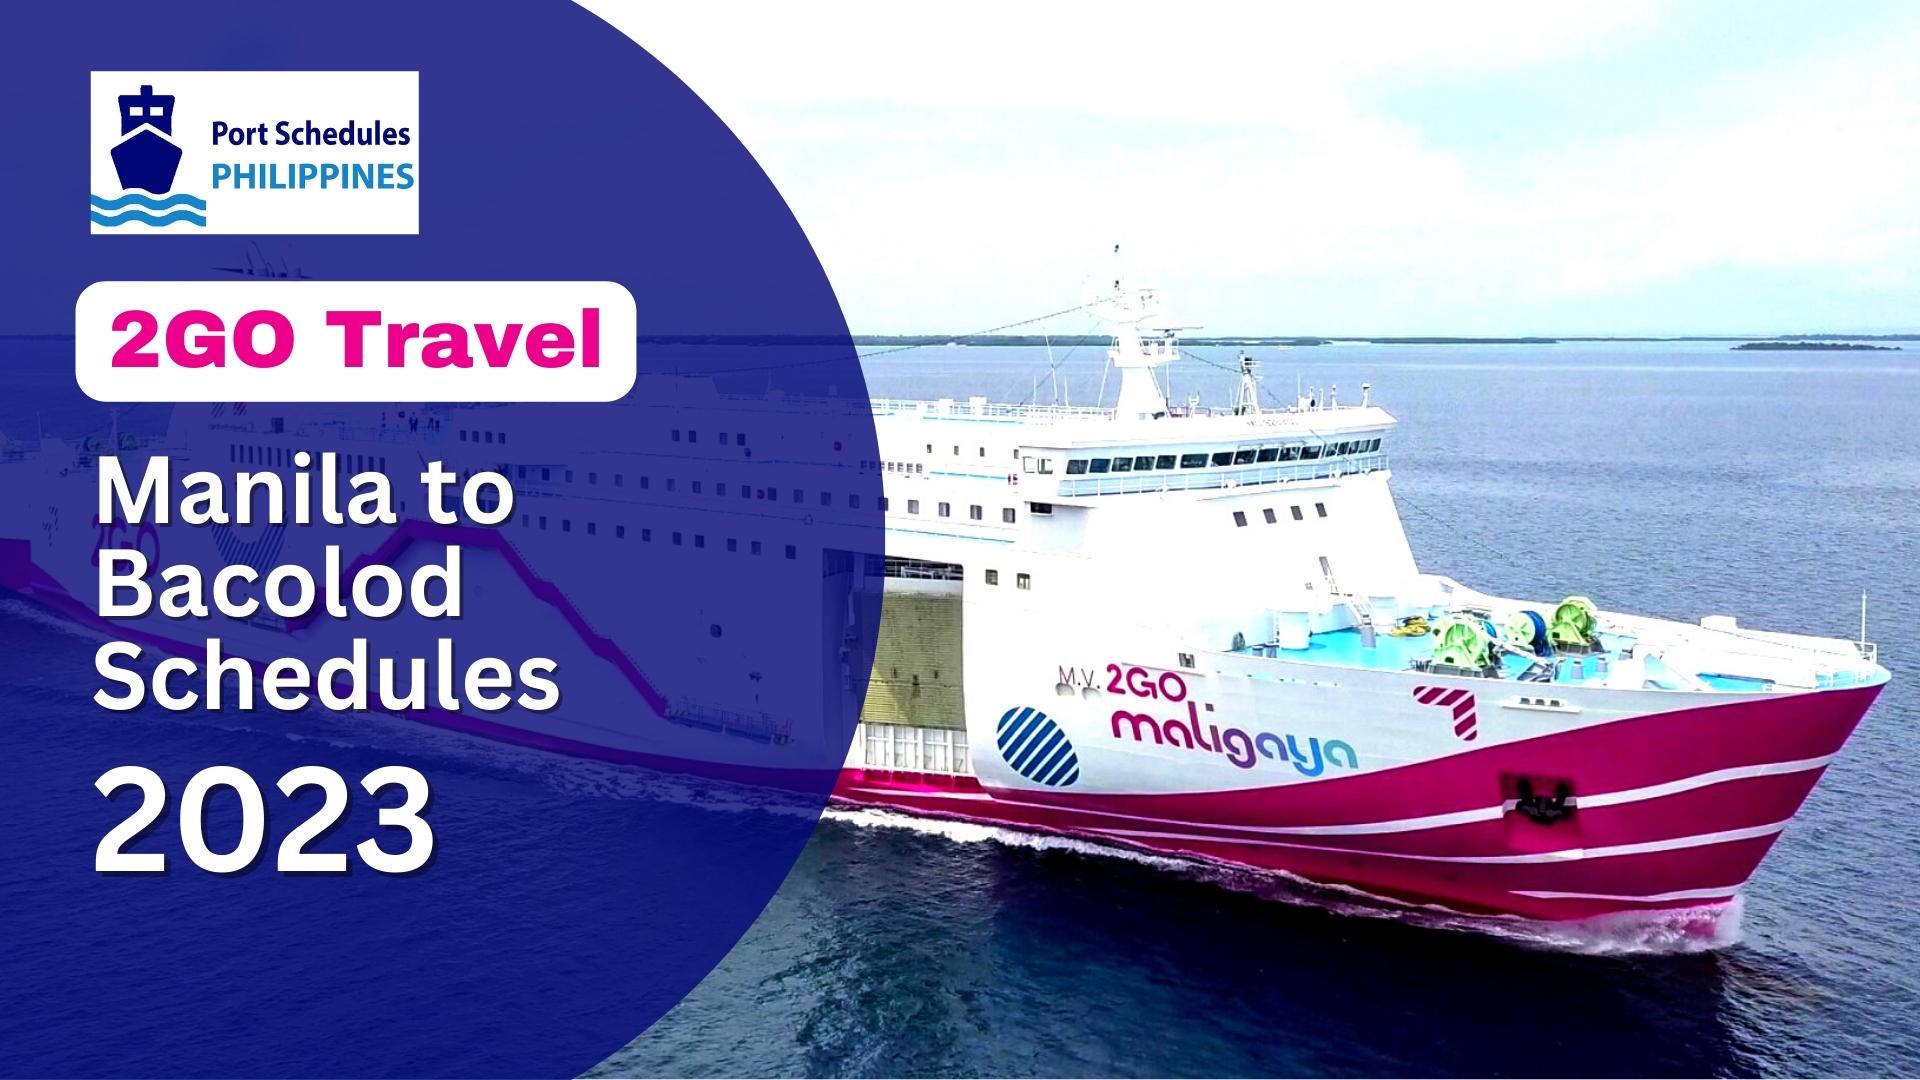 2GO Travel Manila to Bacolod Schedules and Complete Travel Requirements